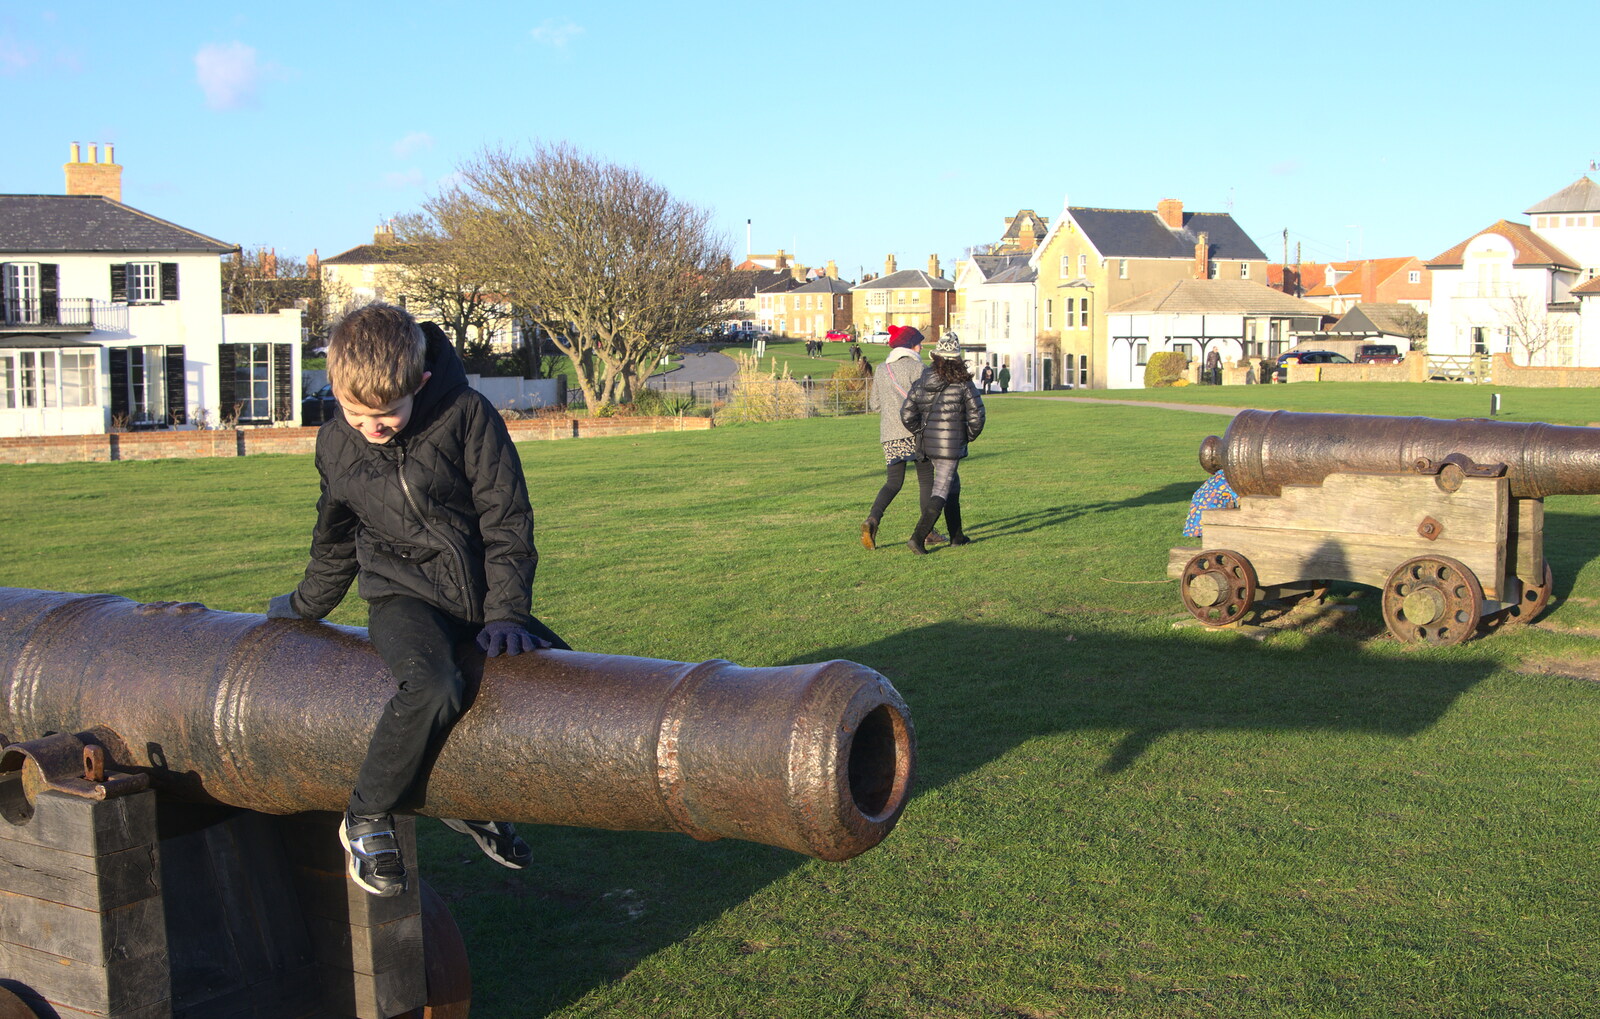 Fred on a cannon on Gun Hill from Boxing Day in Southwold, Suffolk - 26th December 2016